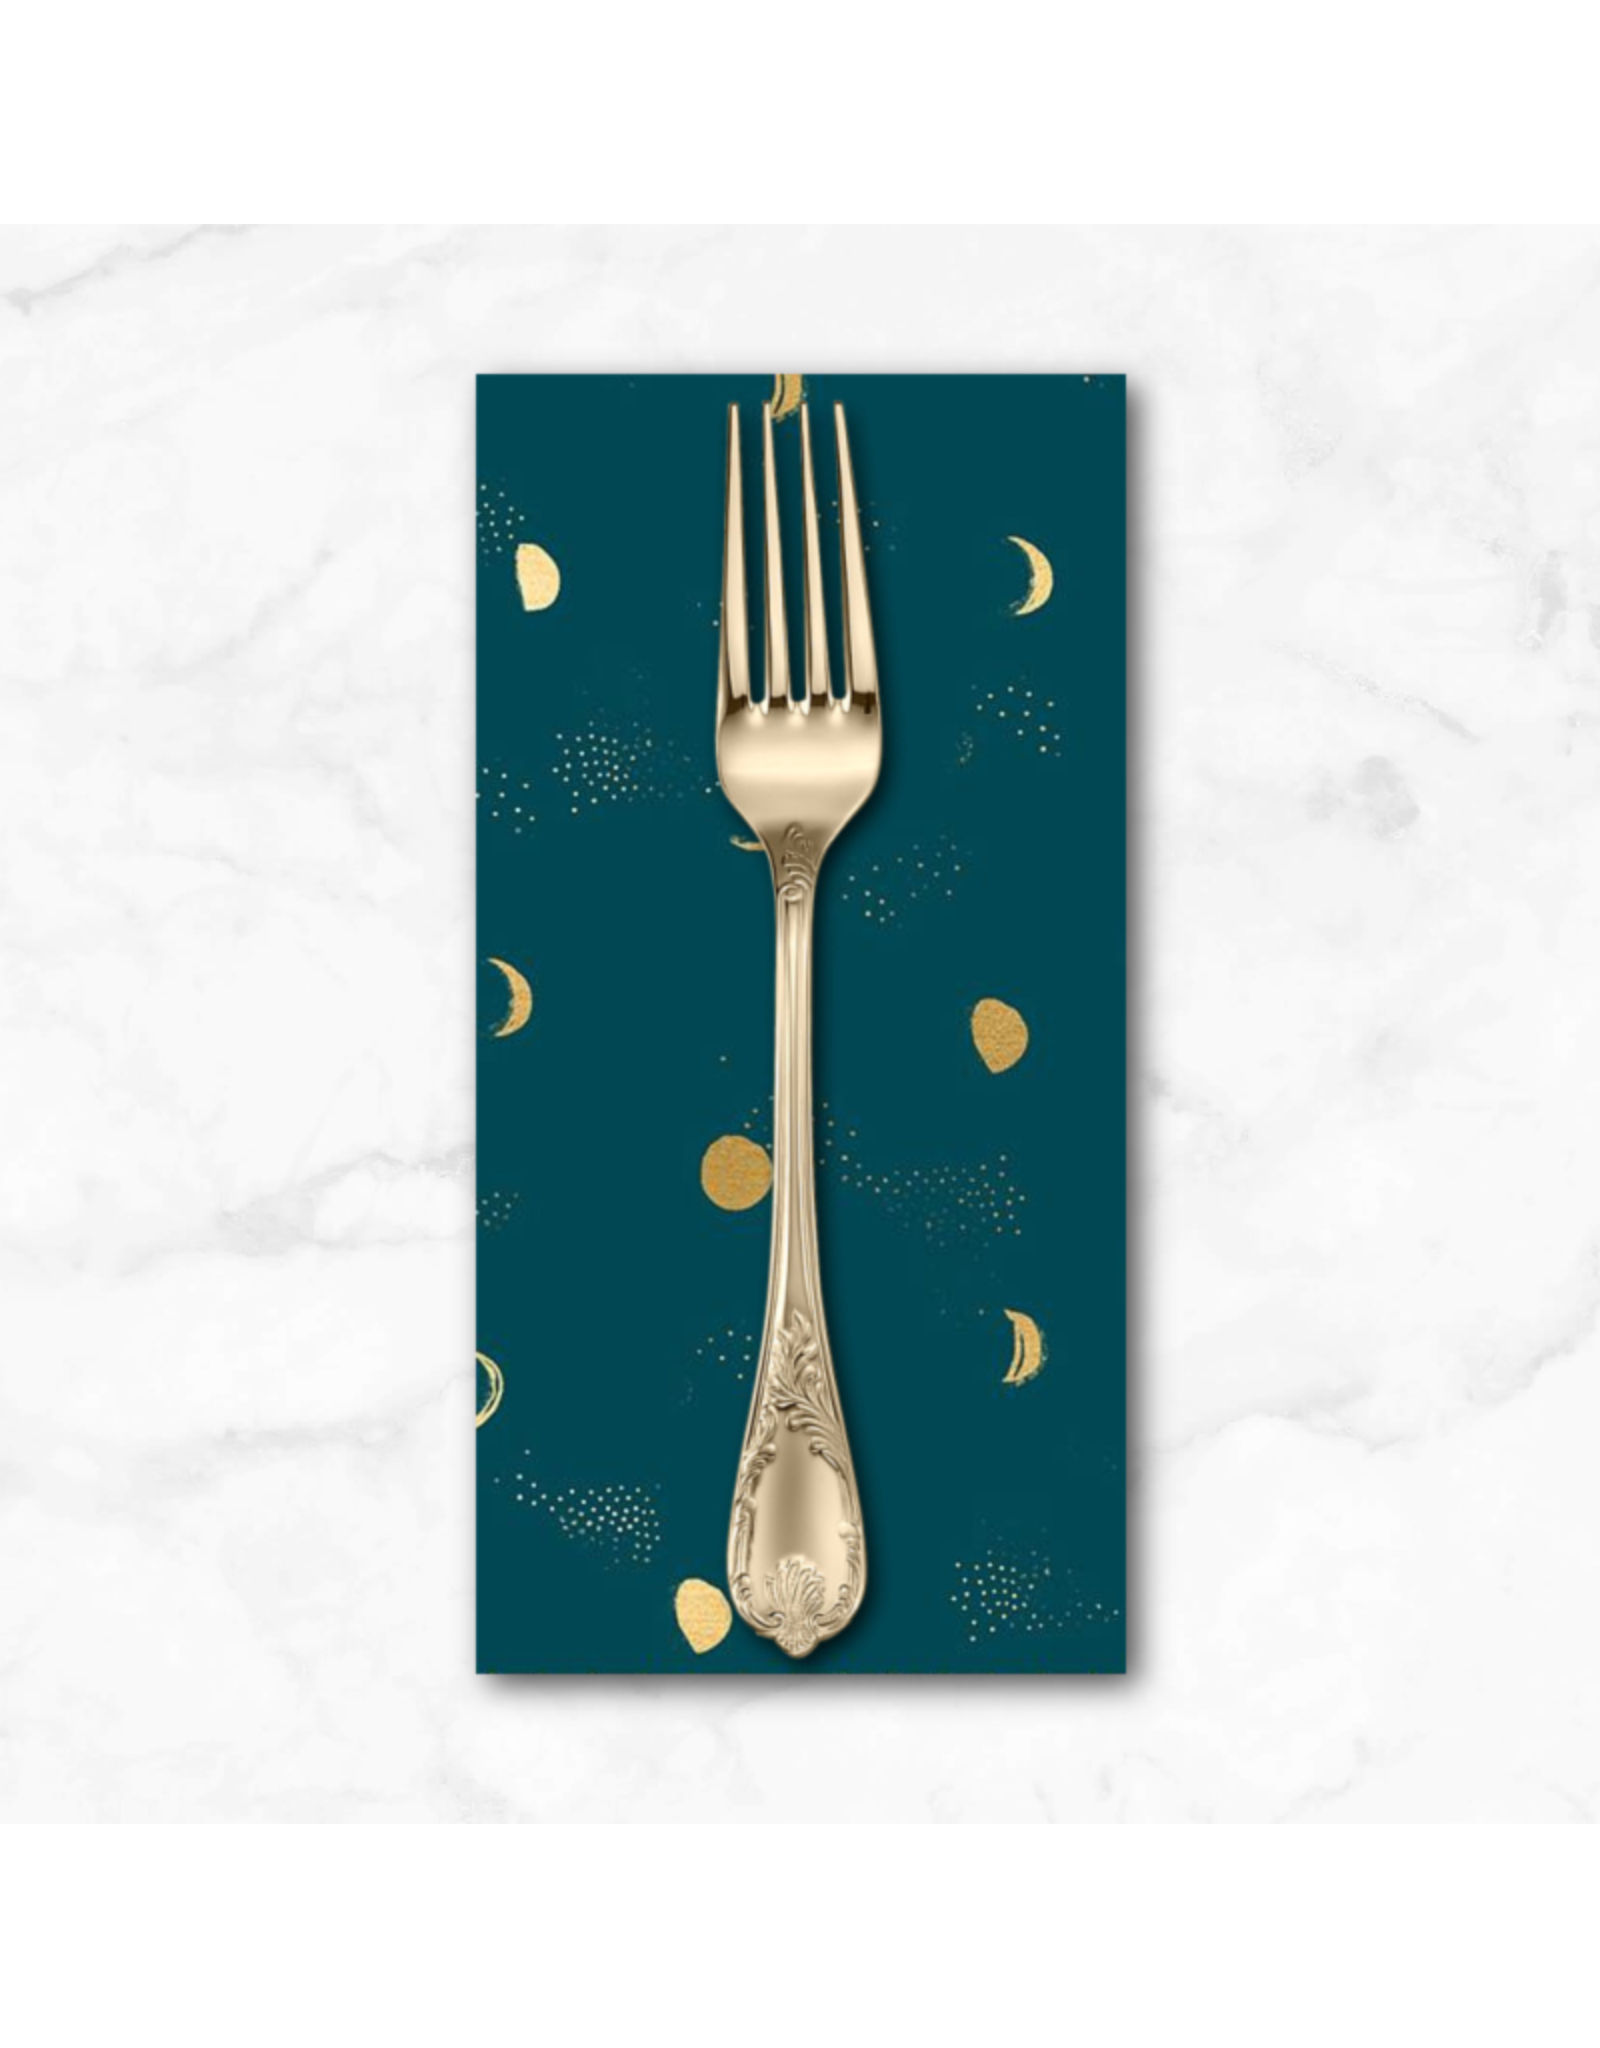 PD's Sarah Watts Collection Firefly, Moon Phase in Galaxy, Dinner Napkin